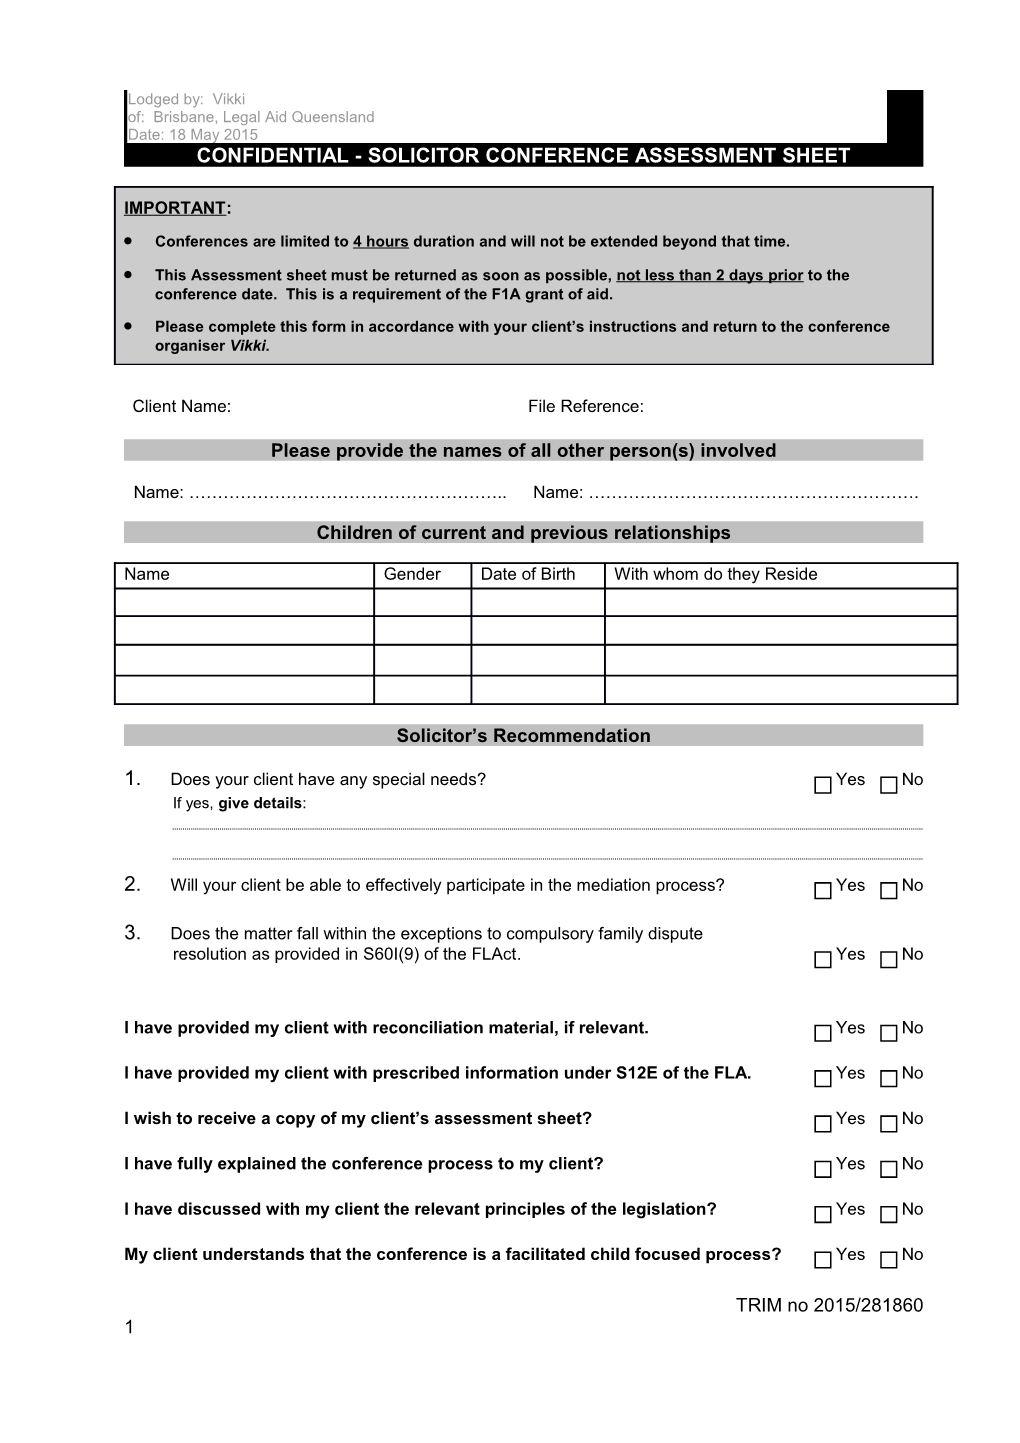 Confidential - Solicitor Conference Assessment Sheet